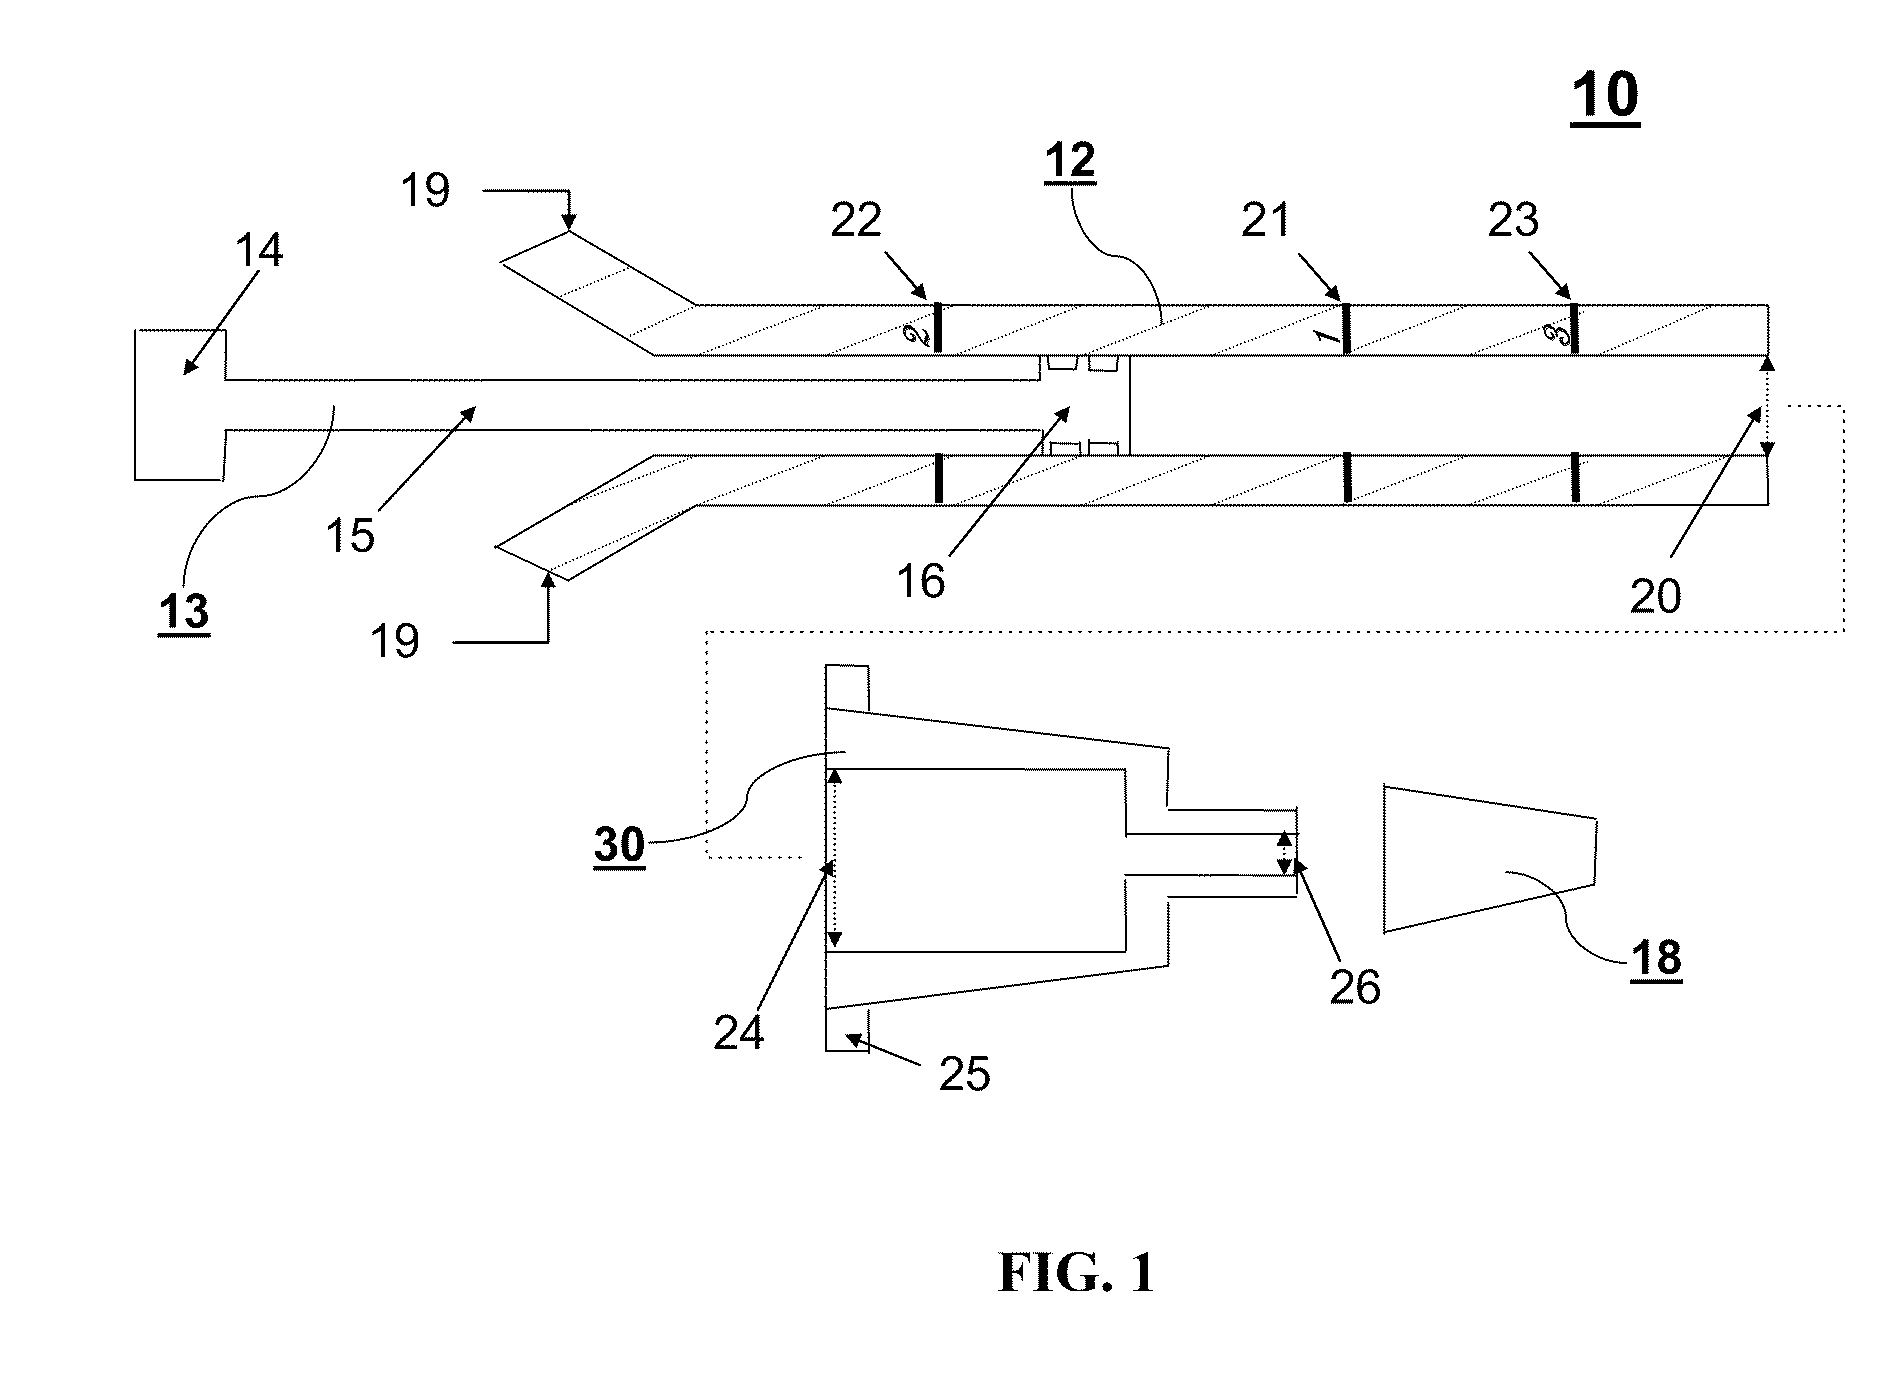 Bone graft material and uses thereof